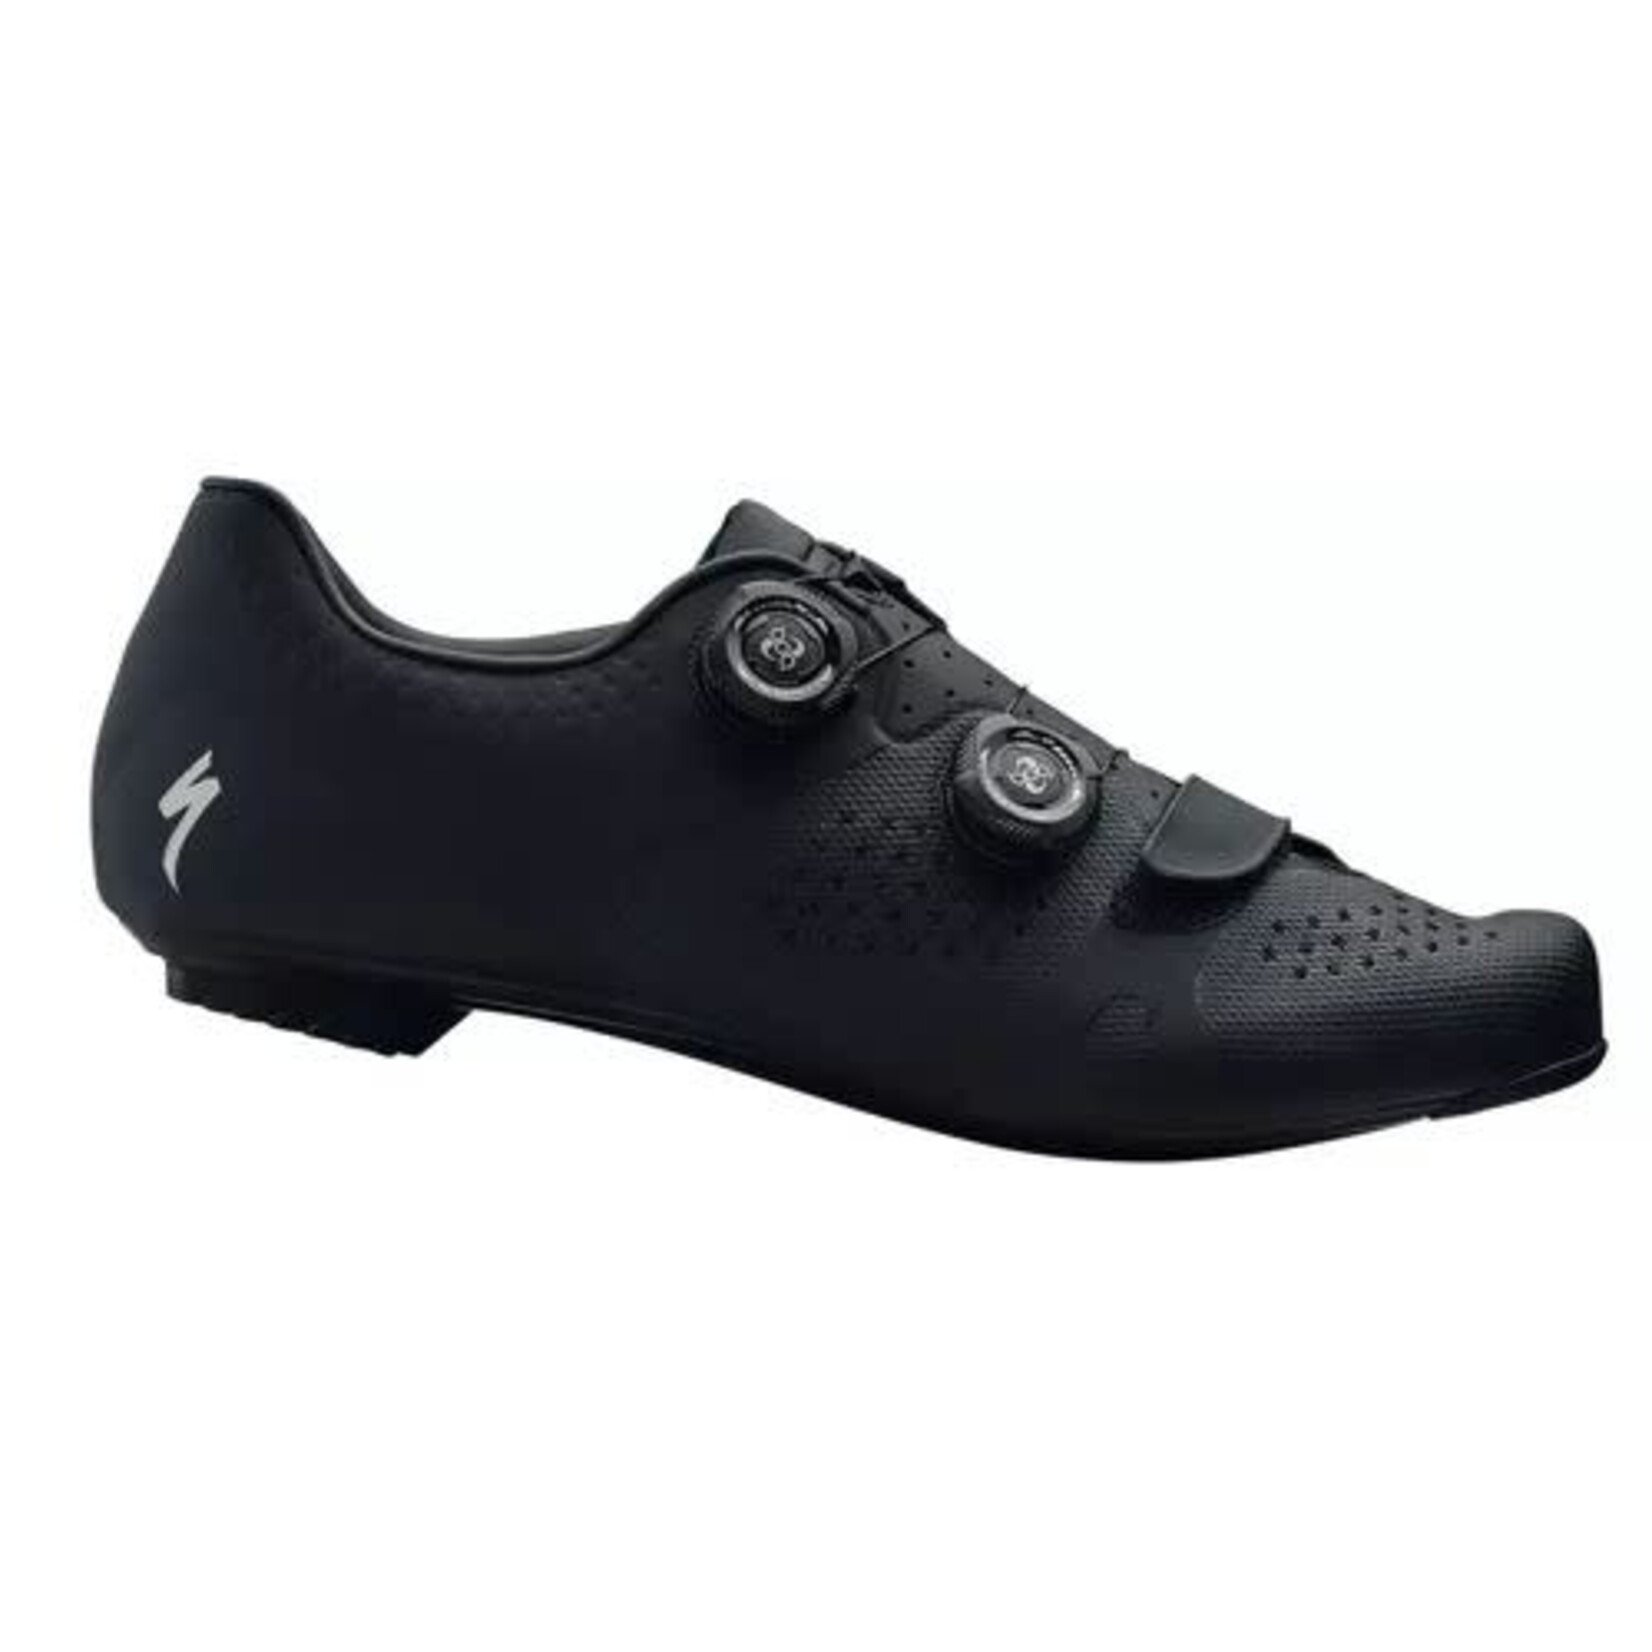 Specialized TORCH 3.0 RD SHOE BLK 48